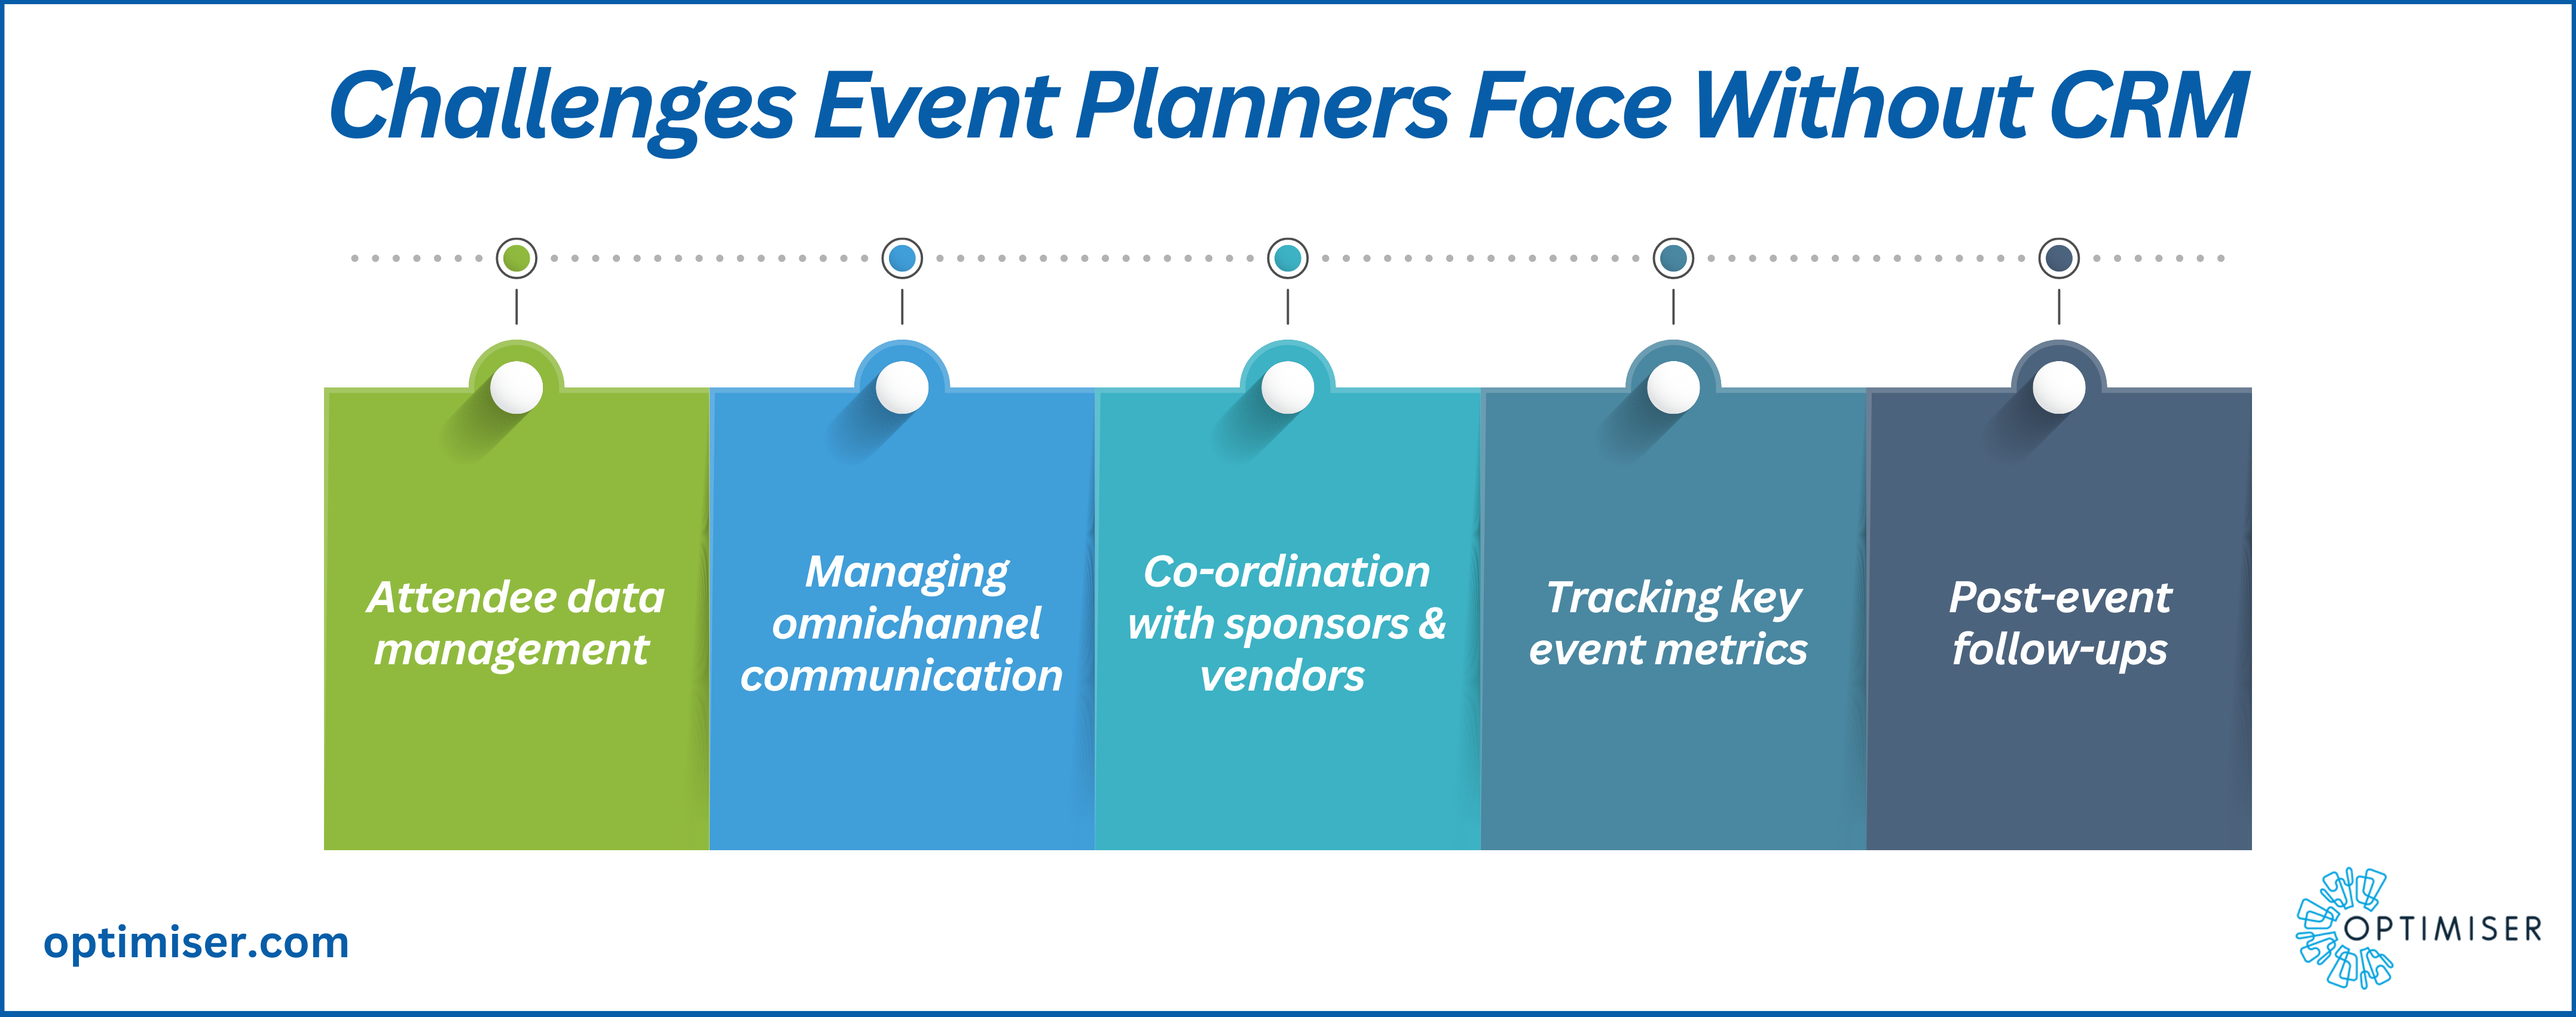 CRM and event management software